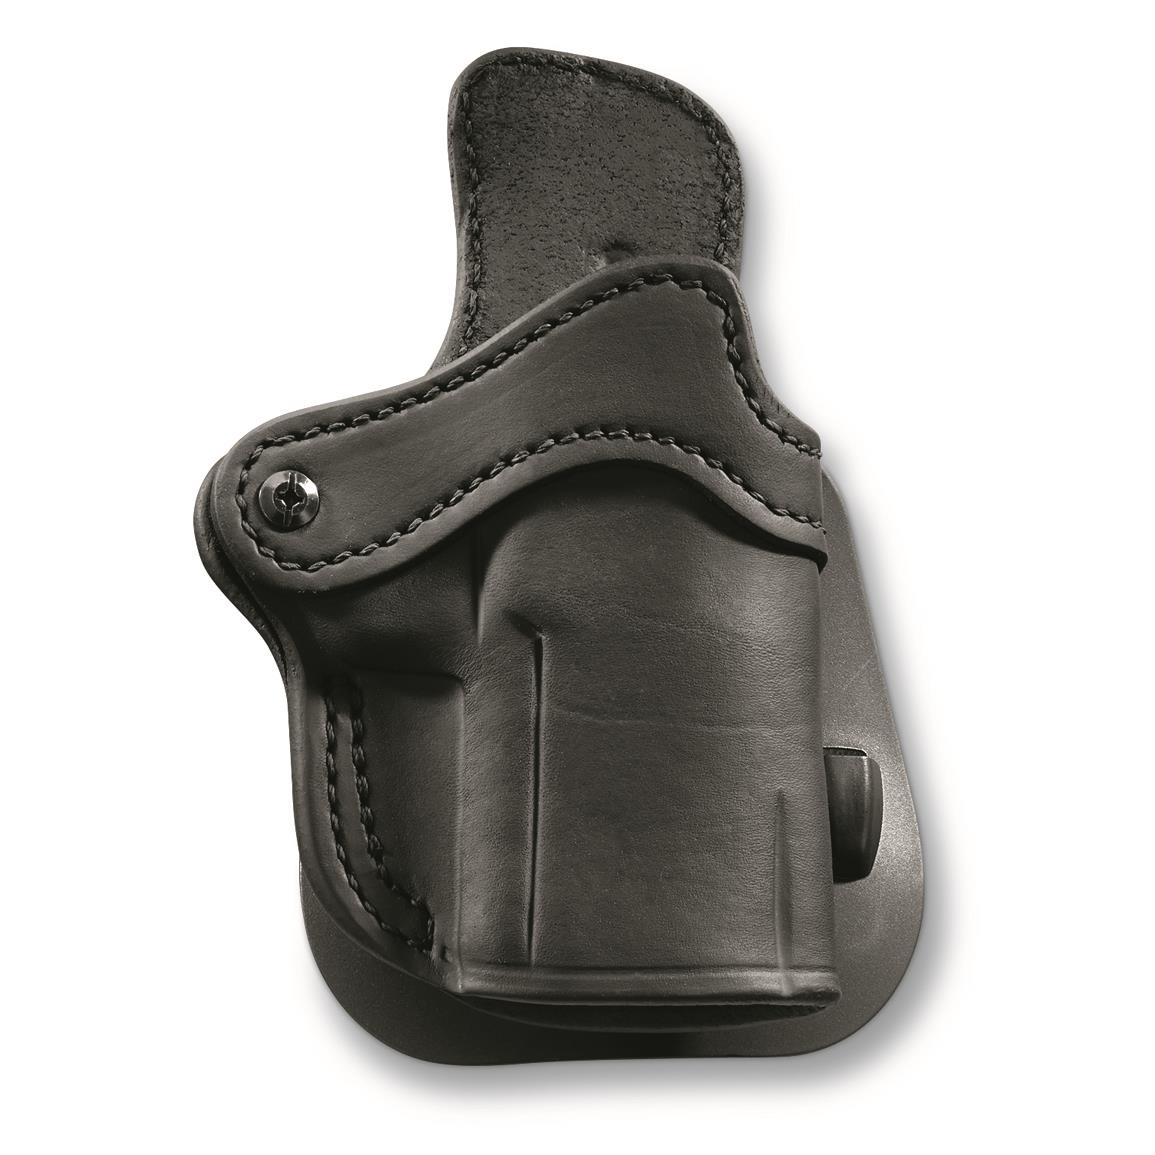 1791 Gunleather Optic Ready 2.4S Paddle Holster, Full Size Compact Pistols, Stealth Black